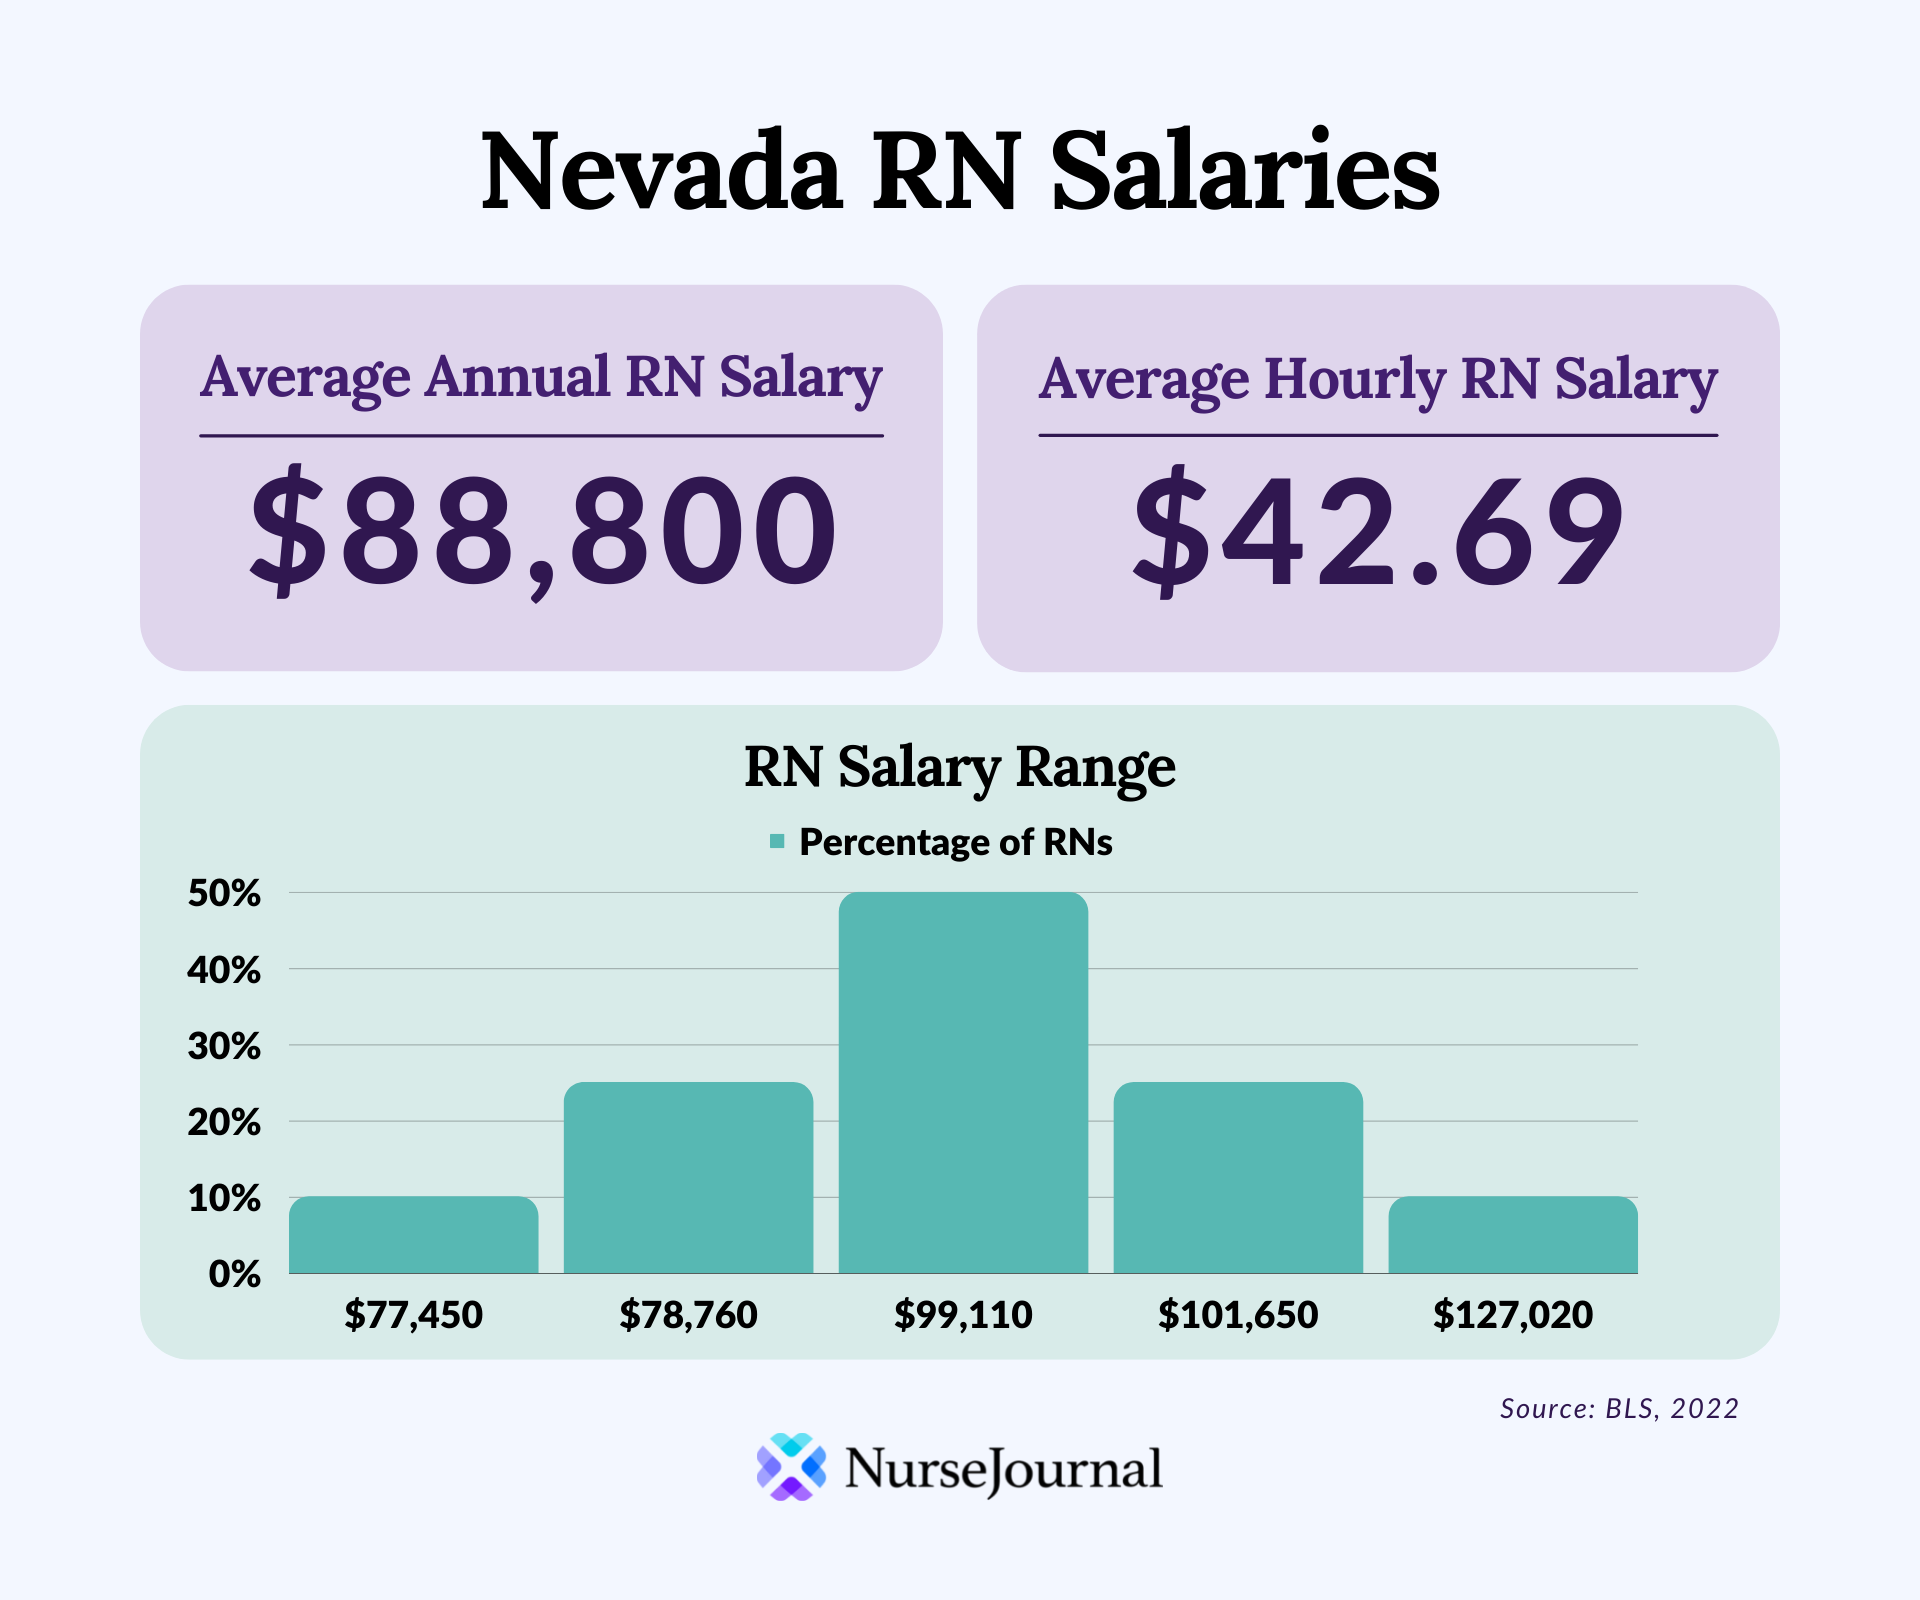 Infographic of registered nursing salary data in Nevada. The average annual RN salary is $88,800. The average hourly RN salary is $42.69. Average RN salaries range from $61,790 among the bottom 10th percentile of earners to $119,530 among the top 90th percentile of earners.